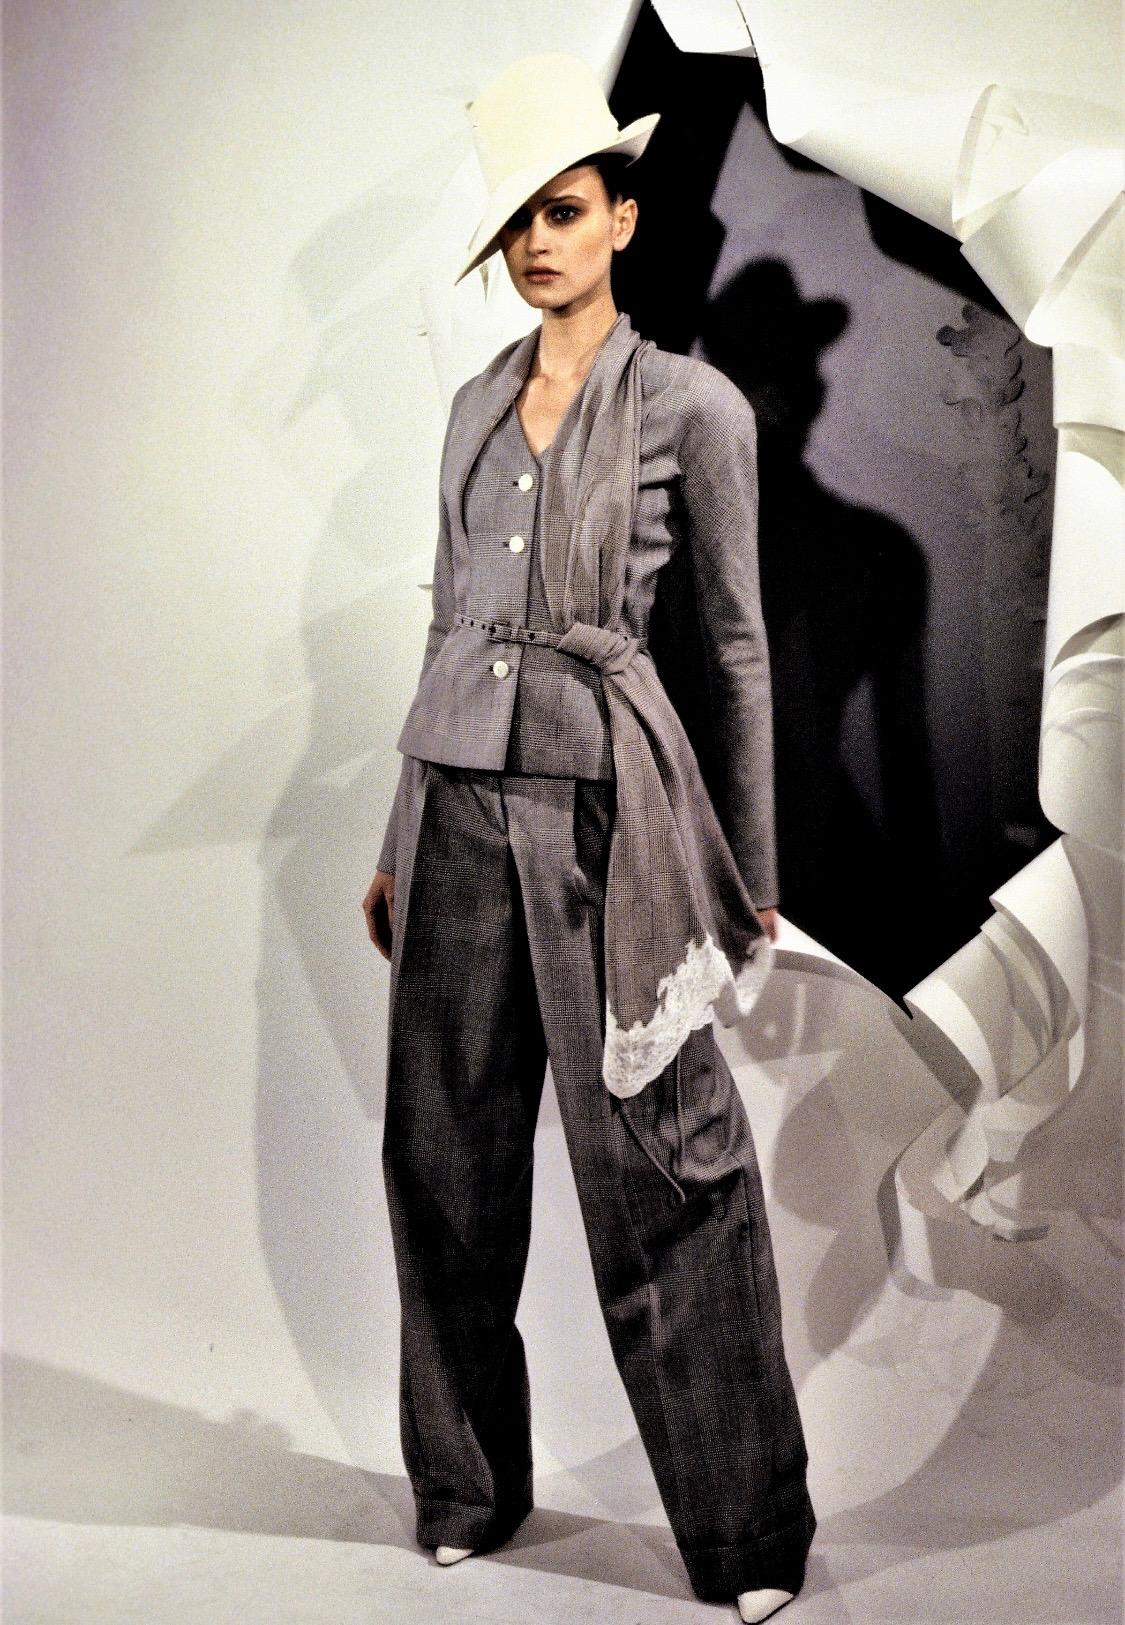 Gray S/S 1999 Christian Dior by John Galliano Victorian Grey Lace Trimmed Skirt Suit For Sale